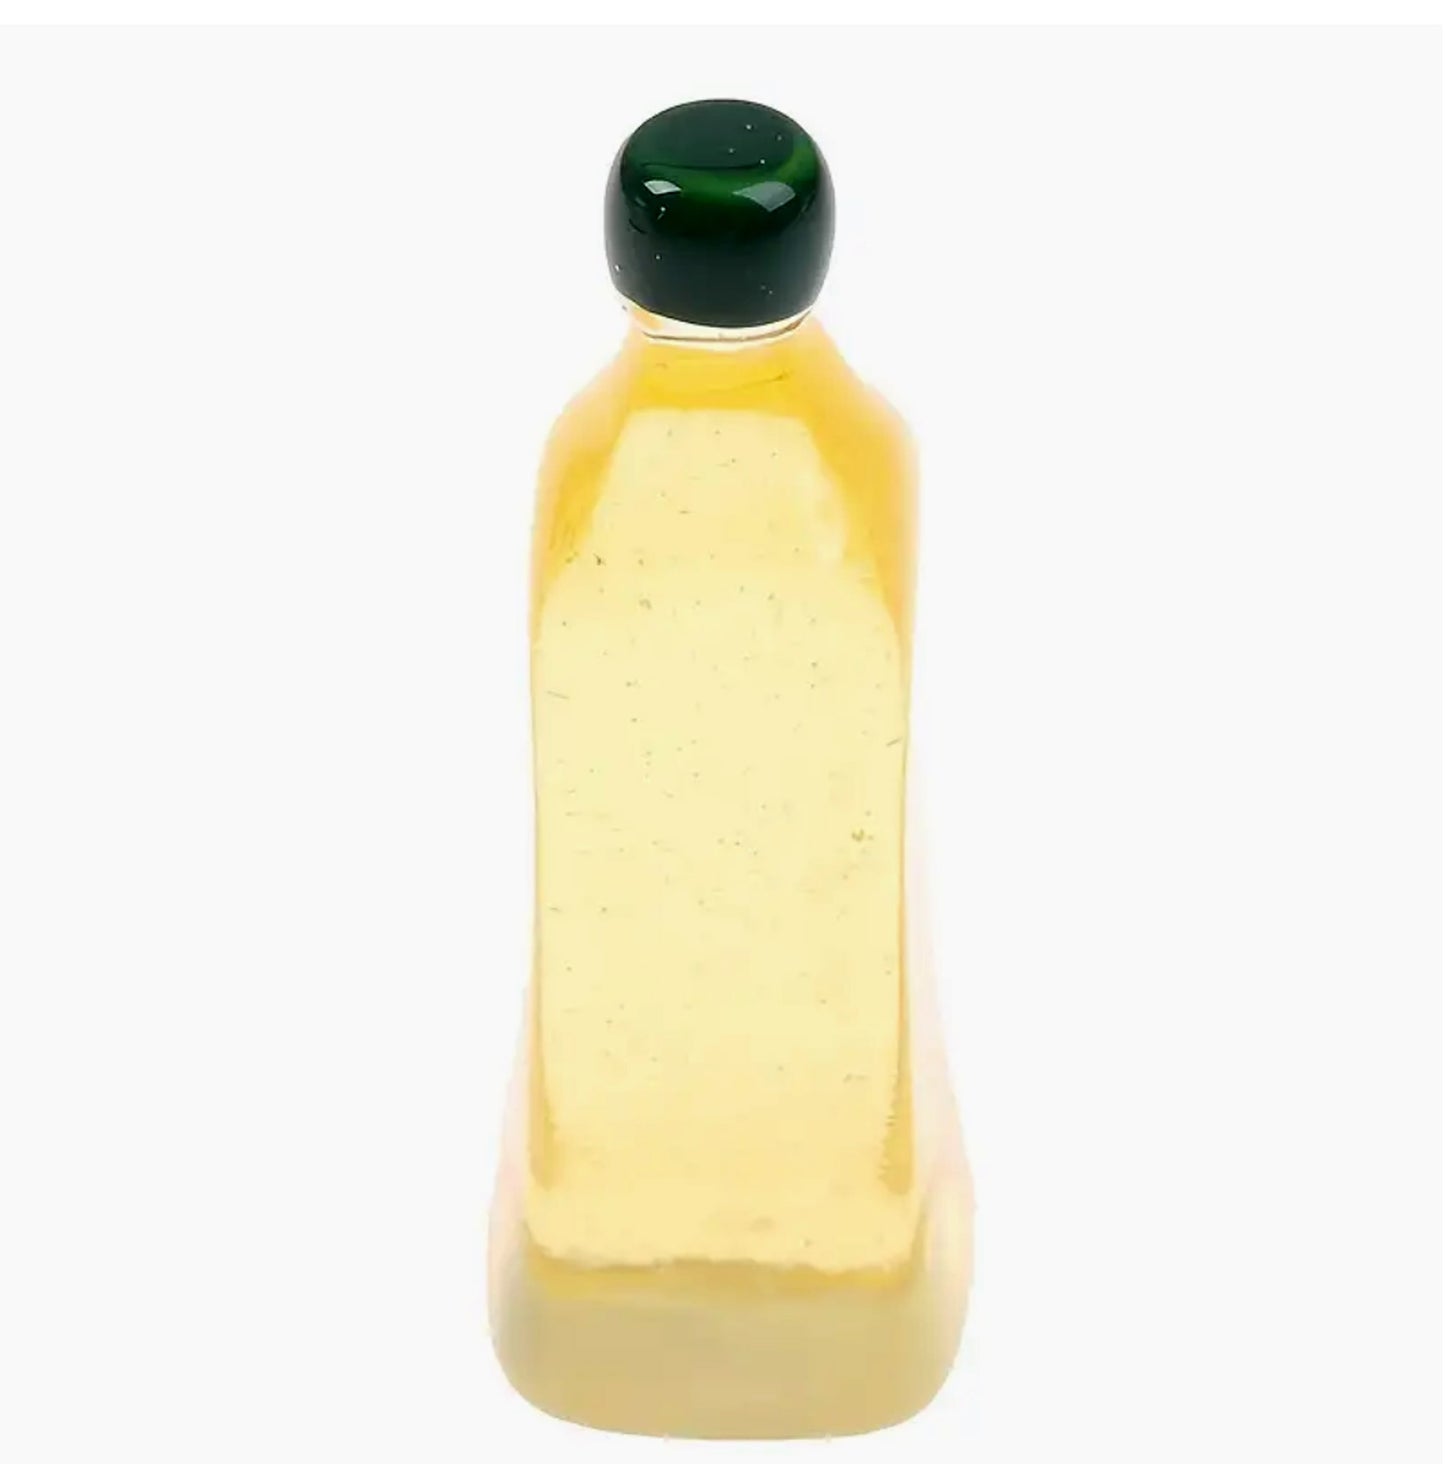 1 12 scale olive oil bottle